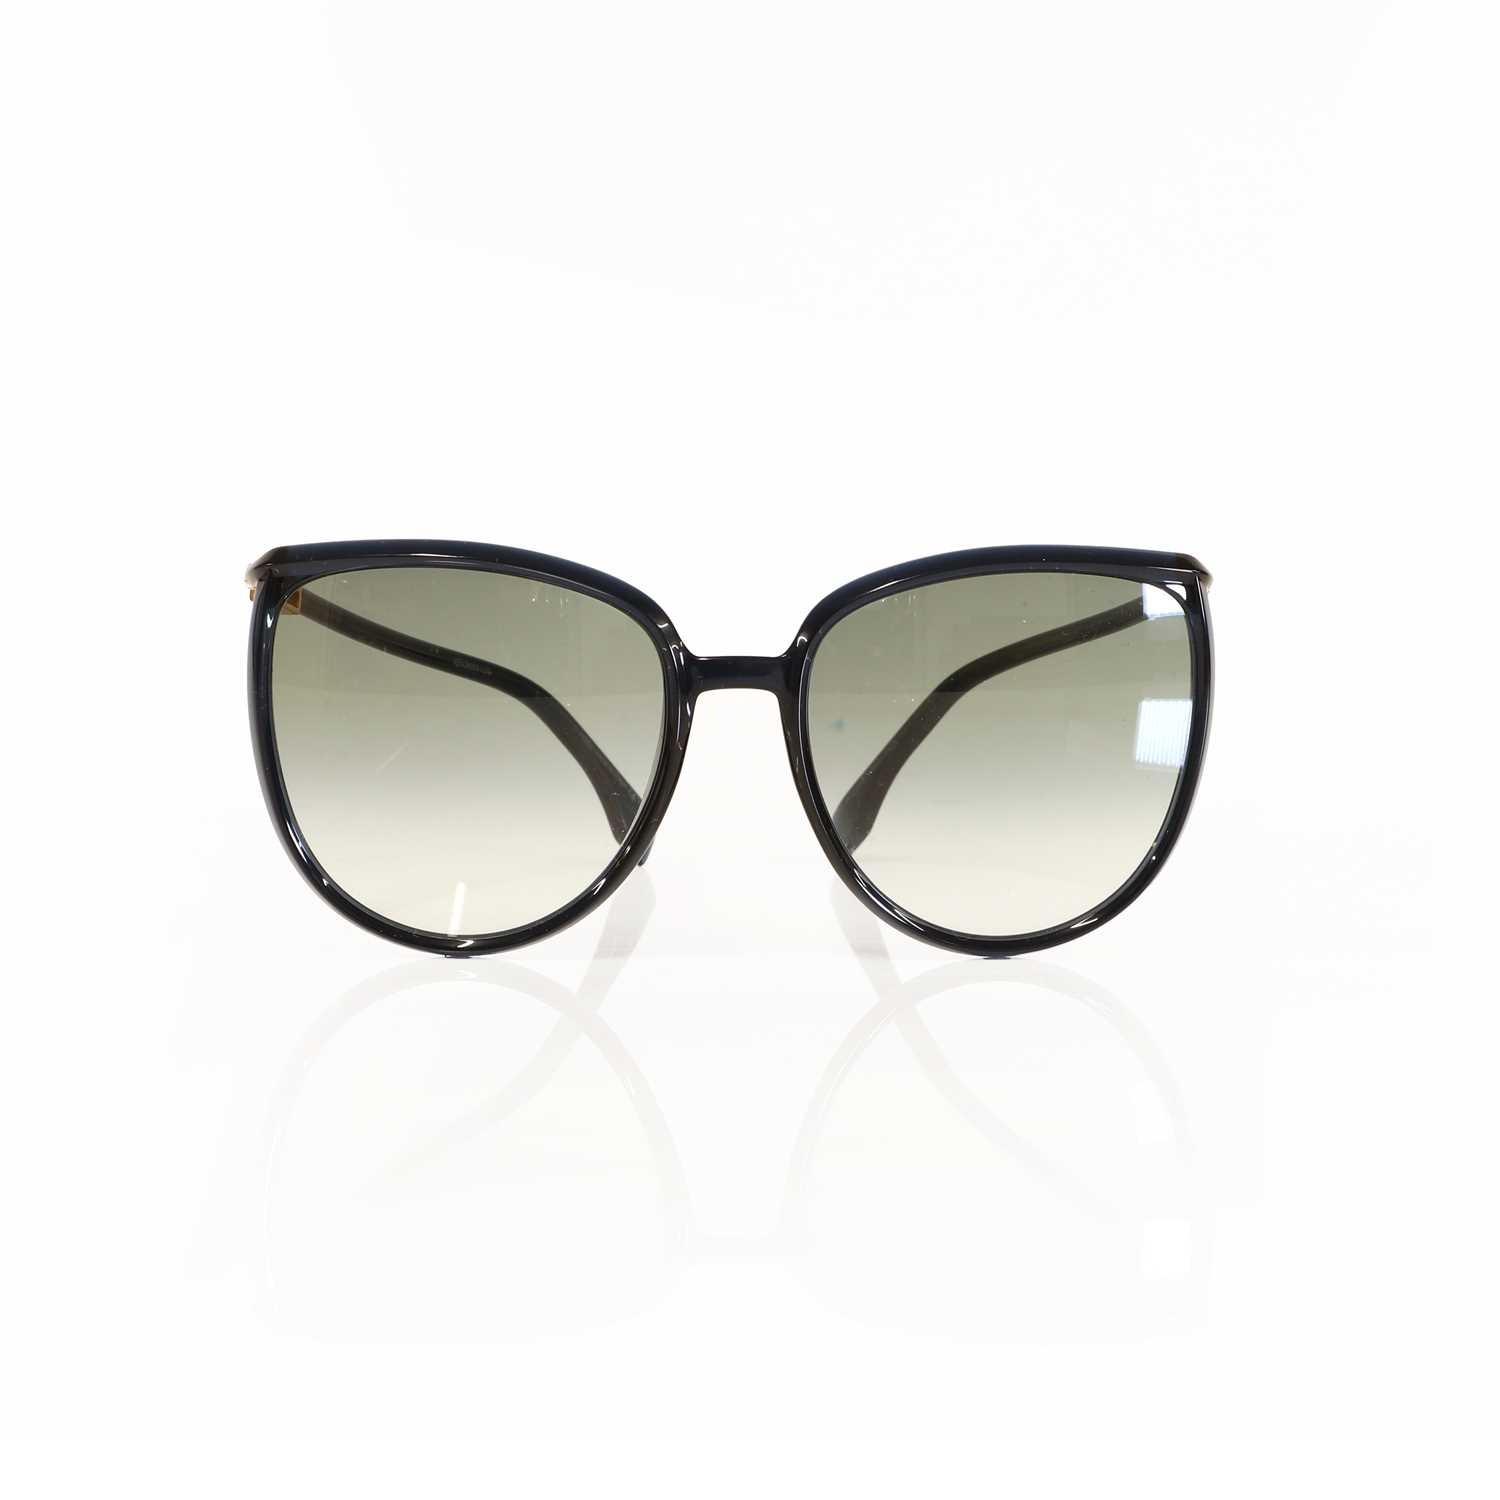 A pair of Christian Dior faux tortoiseshell and silver-rimmed sunglasses, - Image 8 of 9